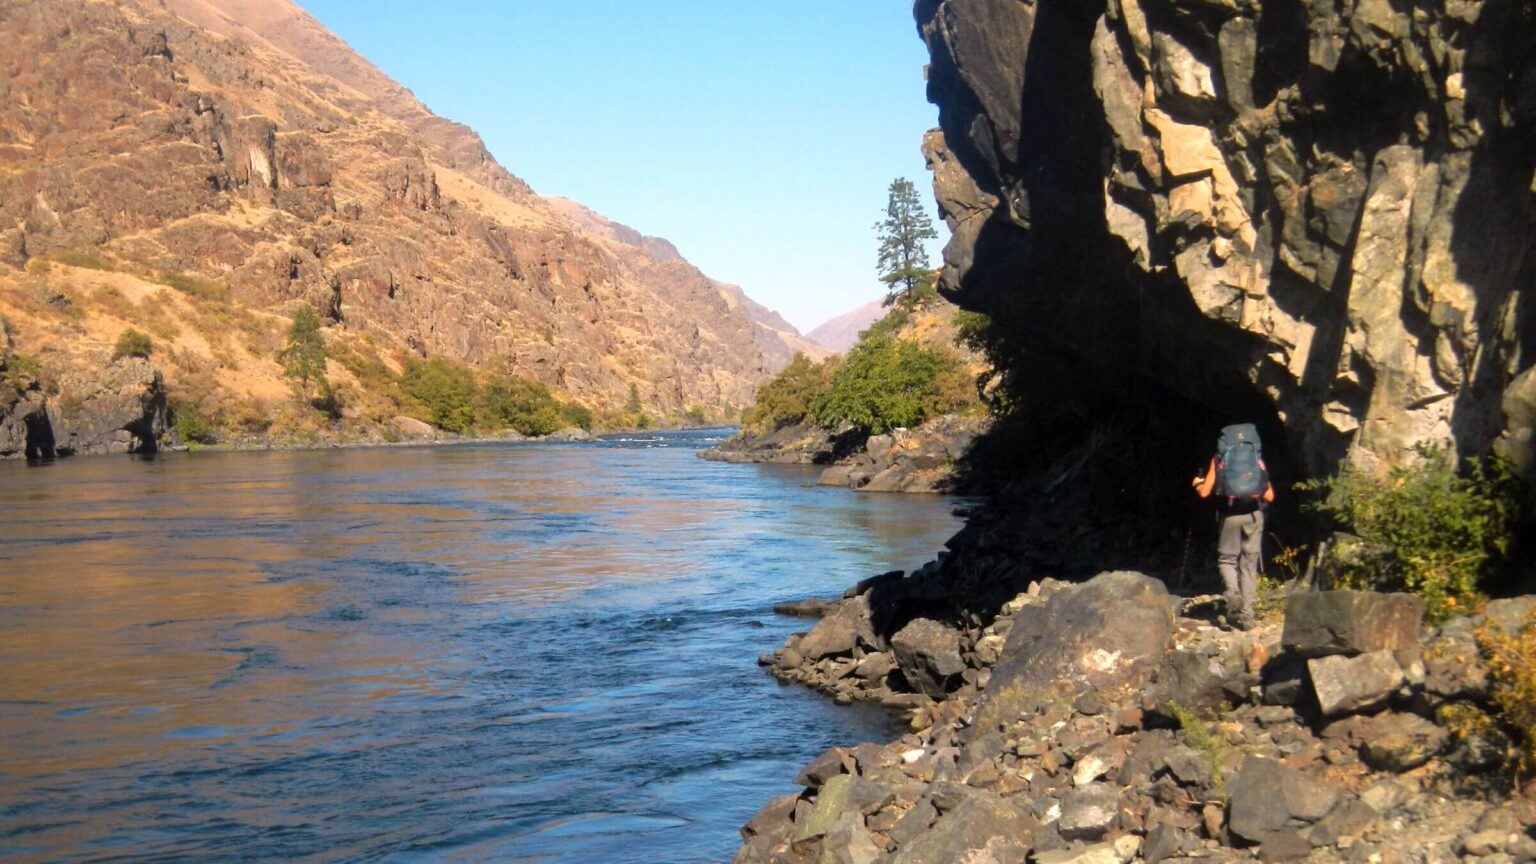 Hells Canyon Wilderness, Snake River National Recreation Trail, October